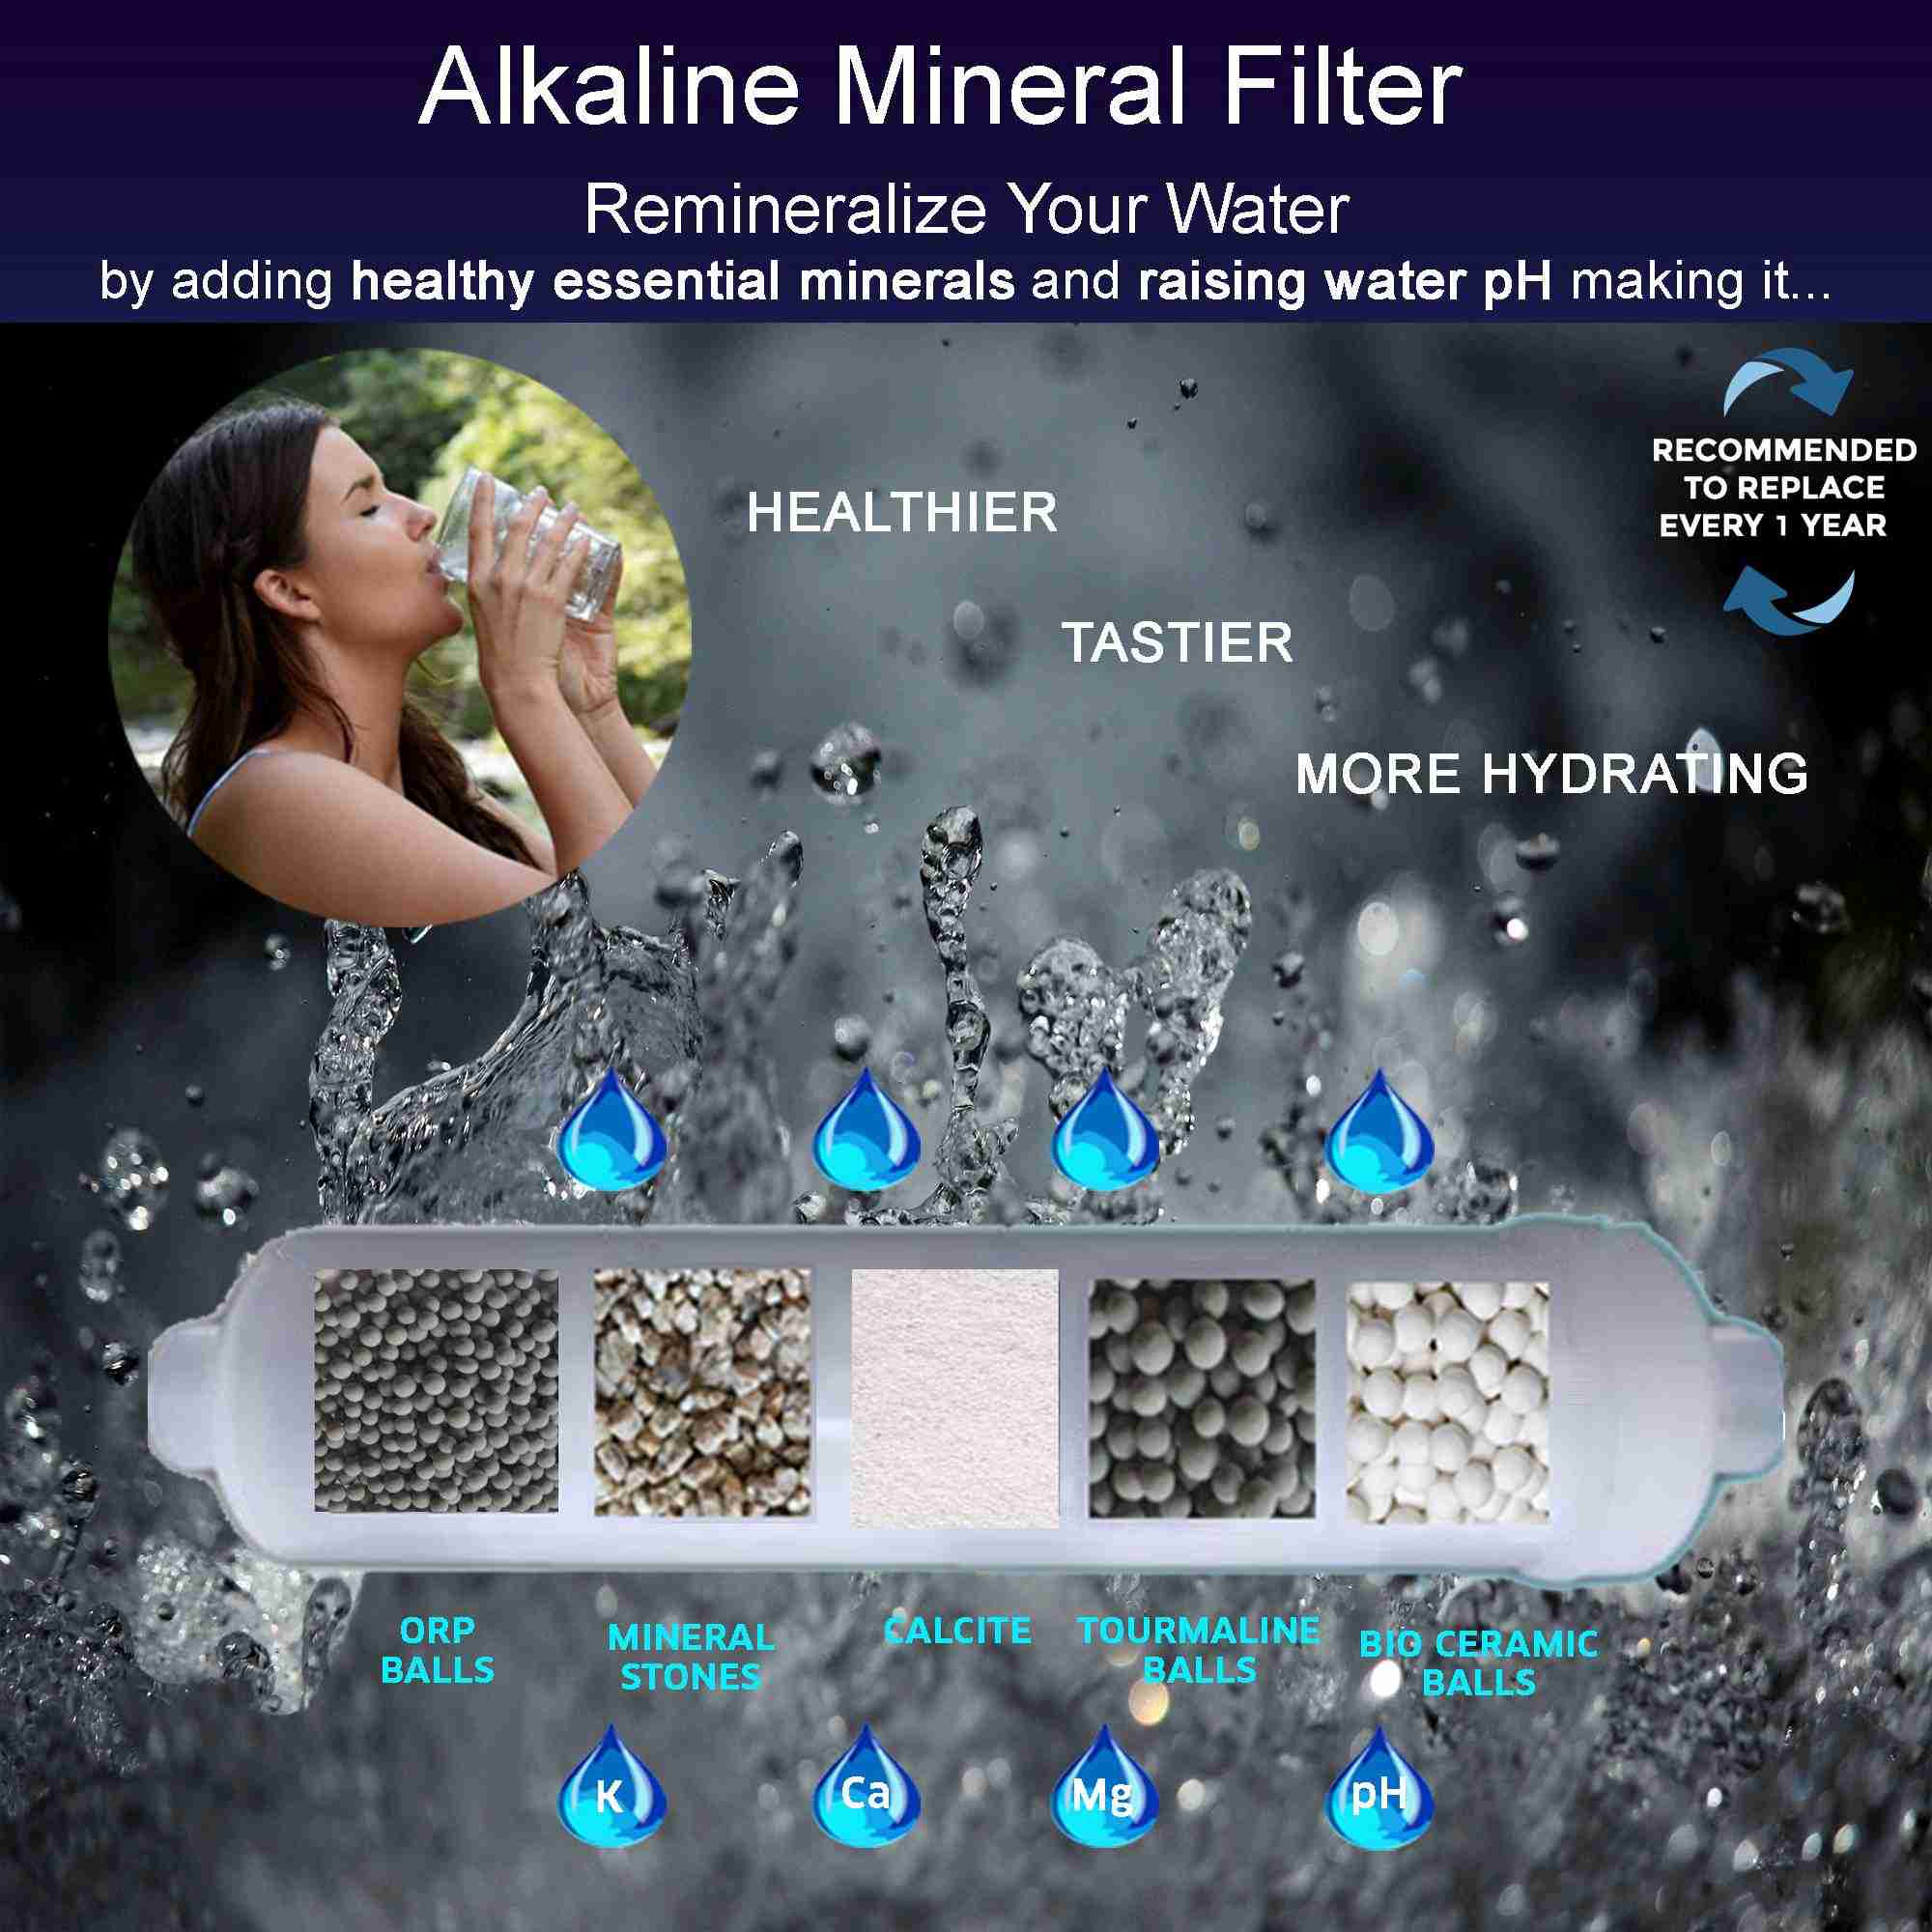 AF-5004 - Ultra 6-Stage Alkaline Mineral pH+ Reverse Osmosis Water Purification Filter - 75 GPD - NSF Filters